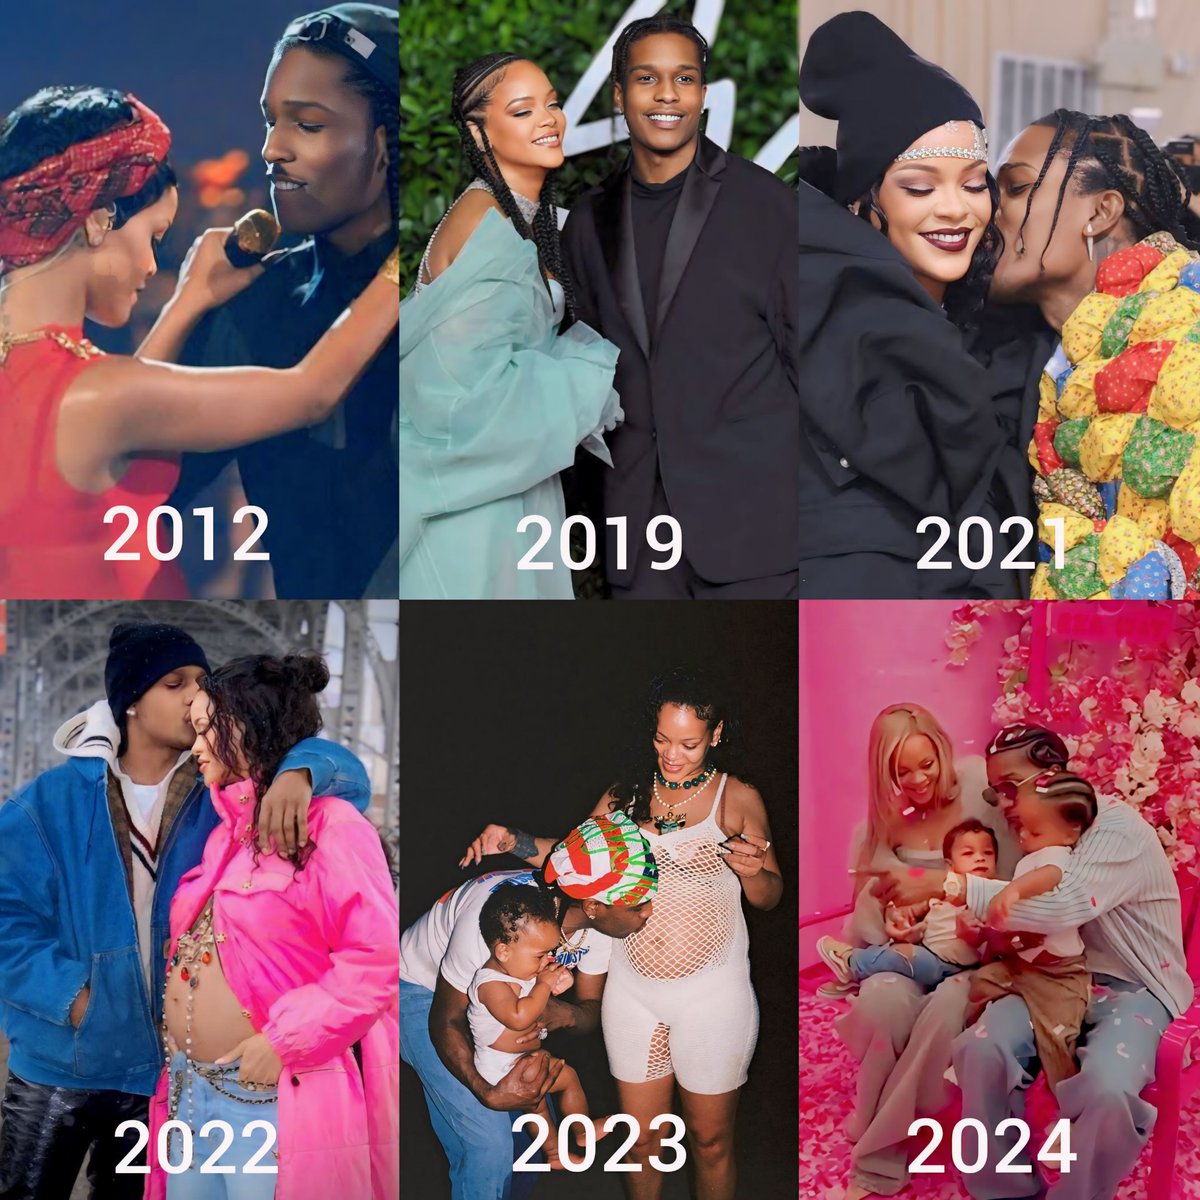 Rihanna and A$AP Rocky through the years.